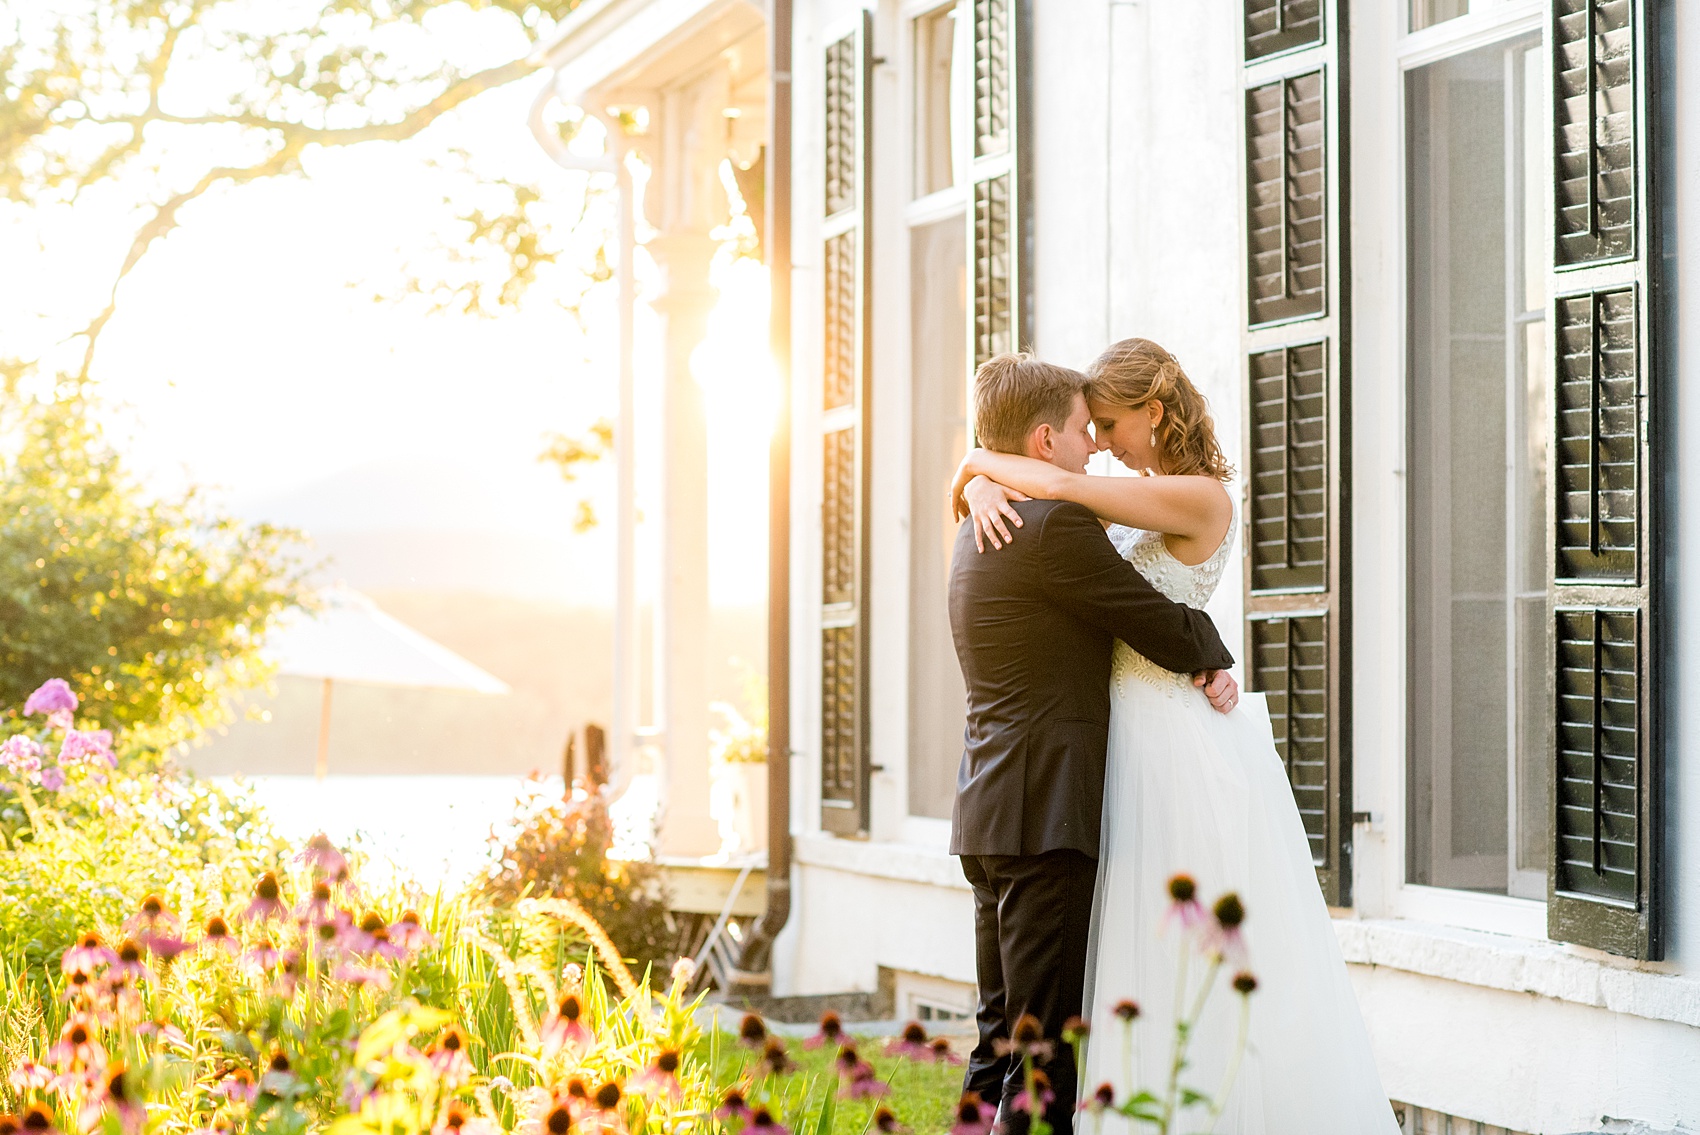 Mikkel Paige Photography photos from a Southwood Estate Wedding in Germantown, New York in the Hudson Valley. Golden hour photo of the bride and groom next to the historic home.